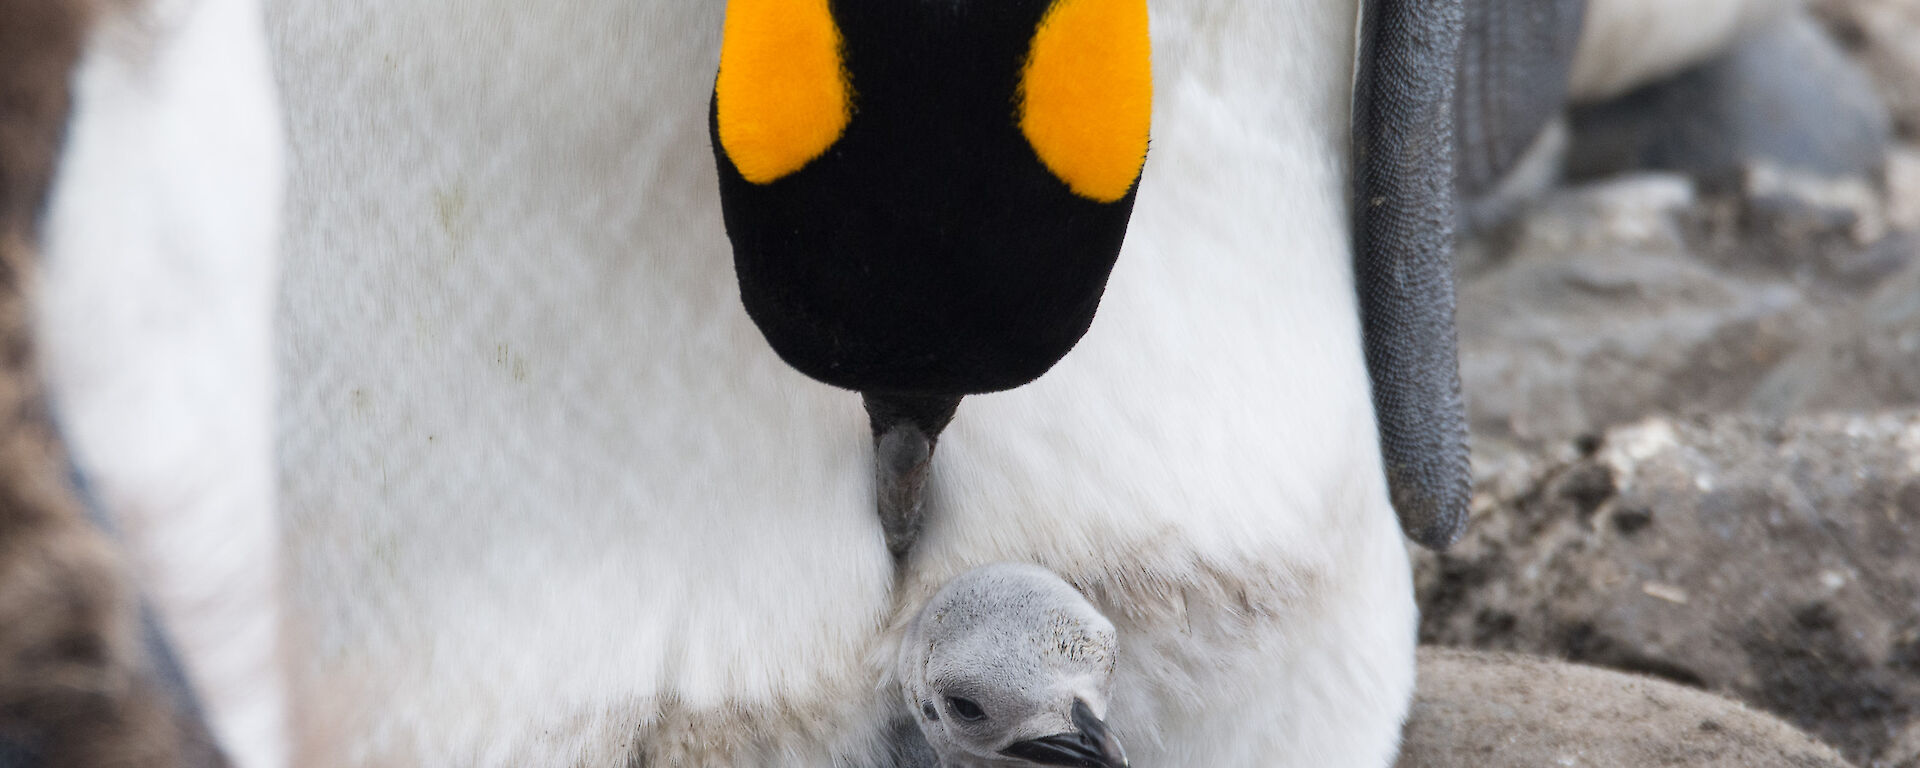 Little king chick under protection of parent